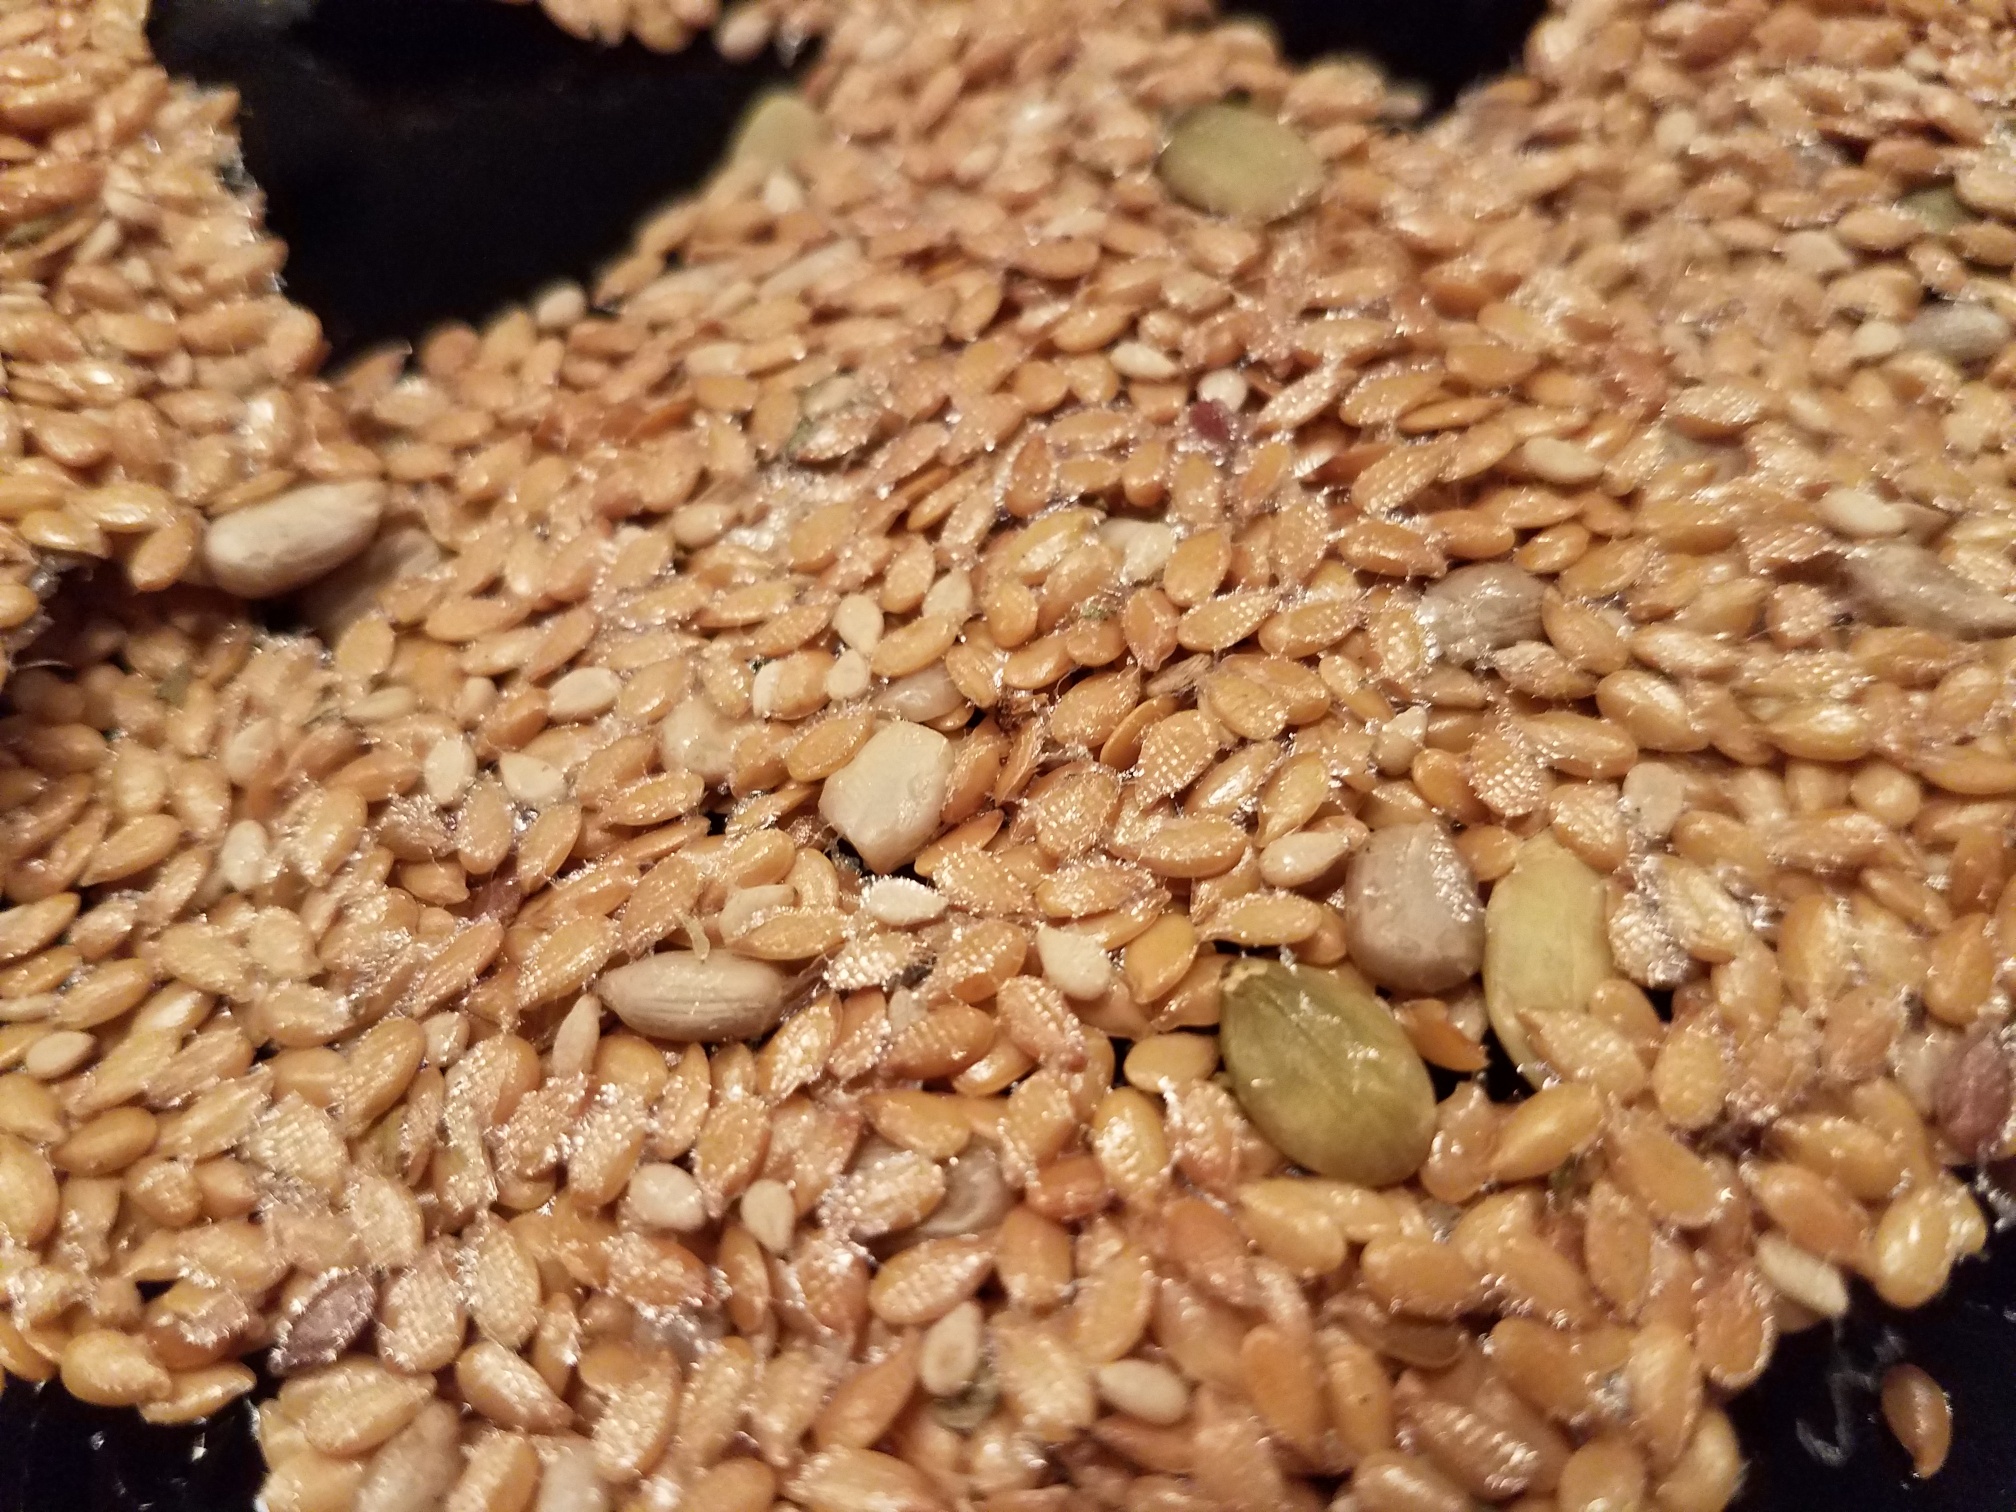 You Need This Superfood: 3 Reasons & 3 Recipes to Add Flaxseed to Your Daily Diet